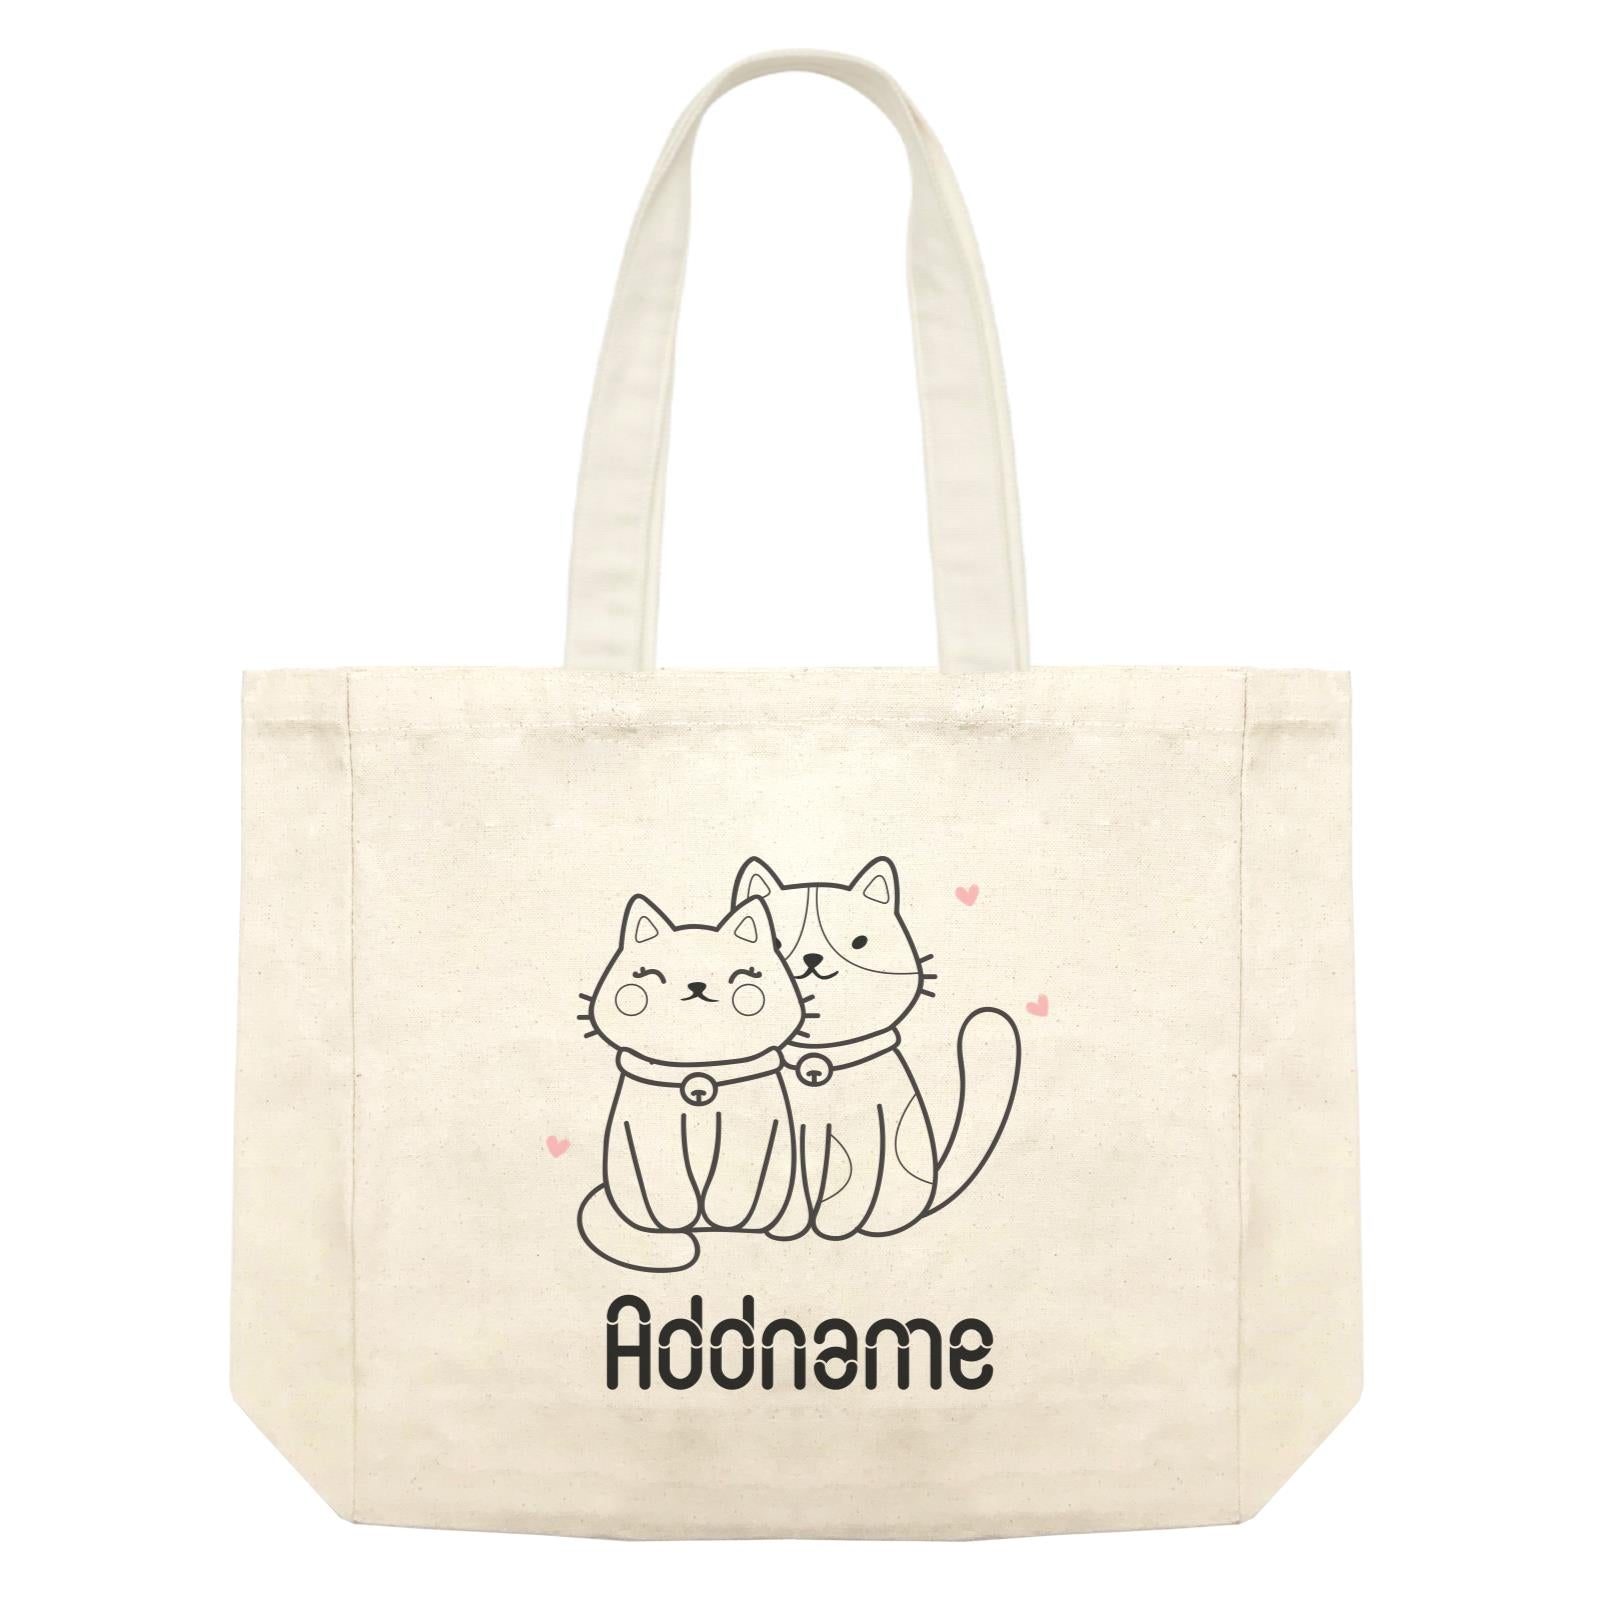 Coloring Outline Cute Hand Drawn Animals Cats Couple Cat Addname Shopping Bag